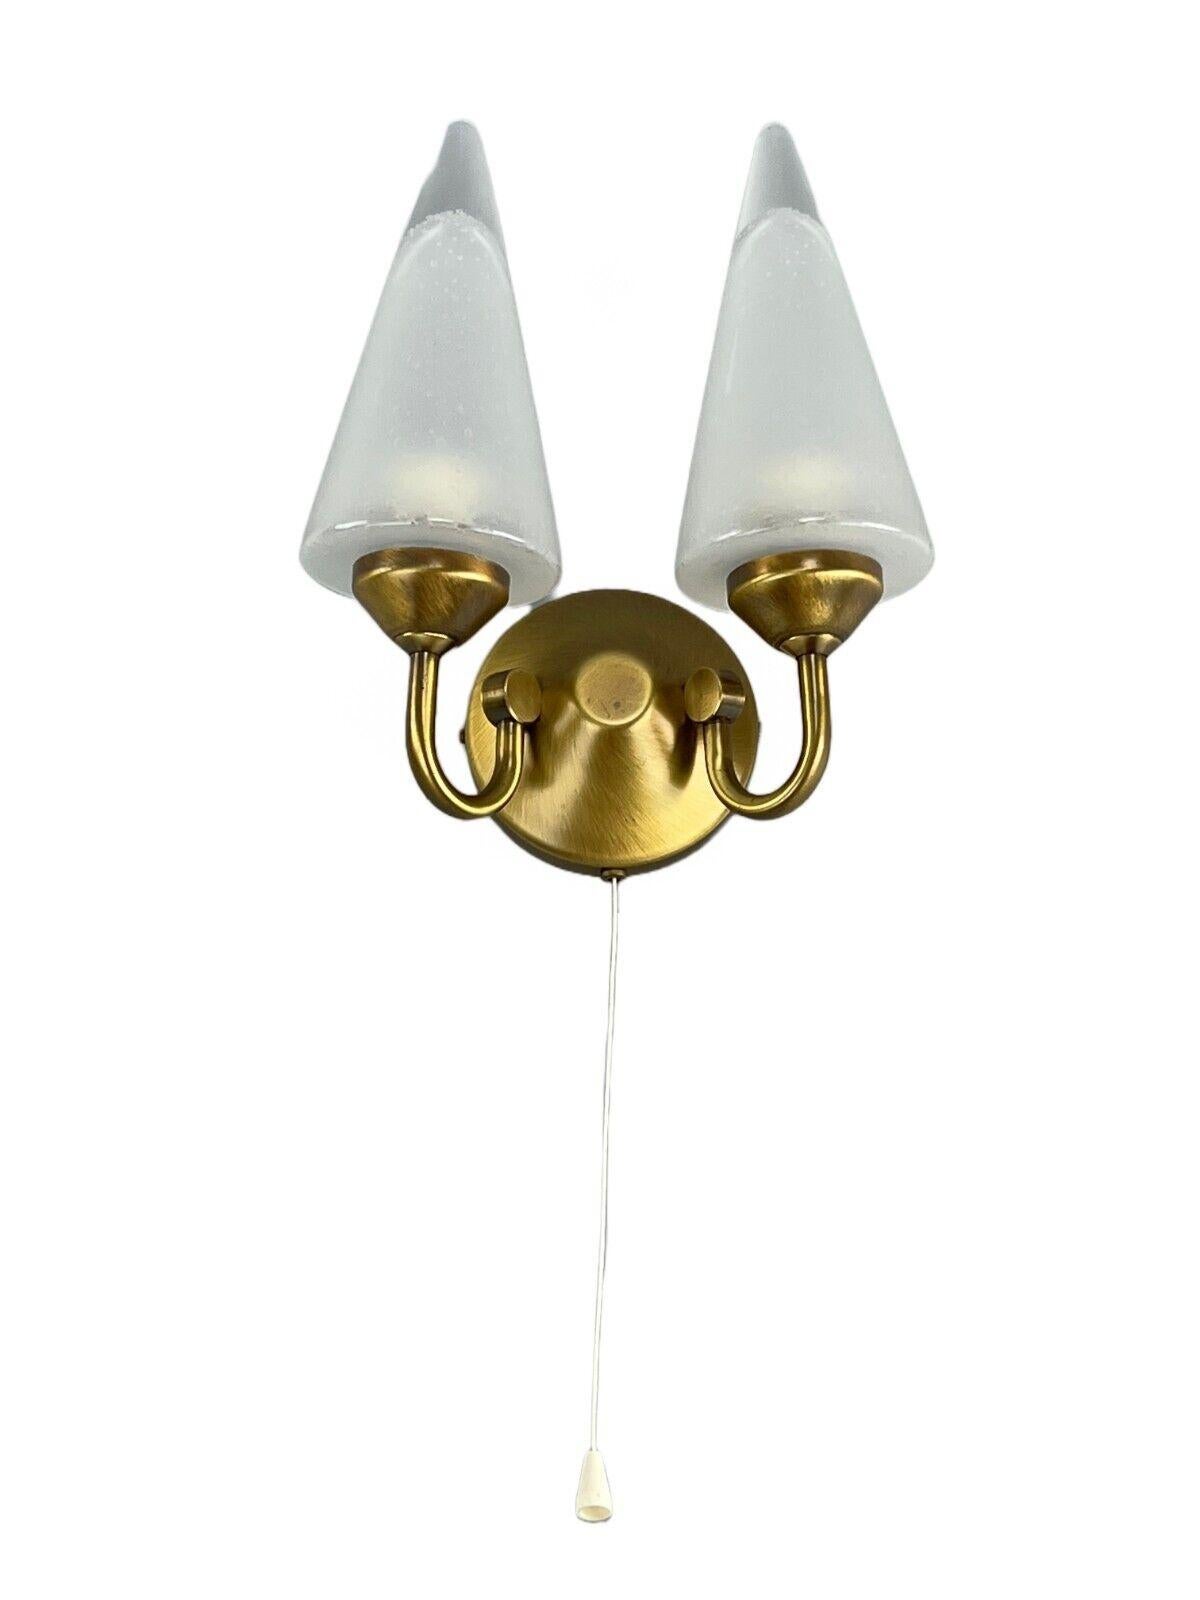 60s 70s lamp light wall lamp wall sconce honsel glass space age design

Object: wall lamp

Manufacturer: Honzel

Condition: good

Age: around 1960-1970

Dimensions:

Width = 22cm
Depth = 12cm
Height = 26cm

Other notes:

2x E14